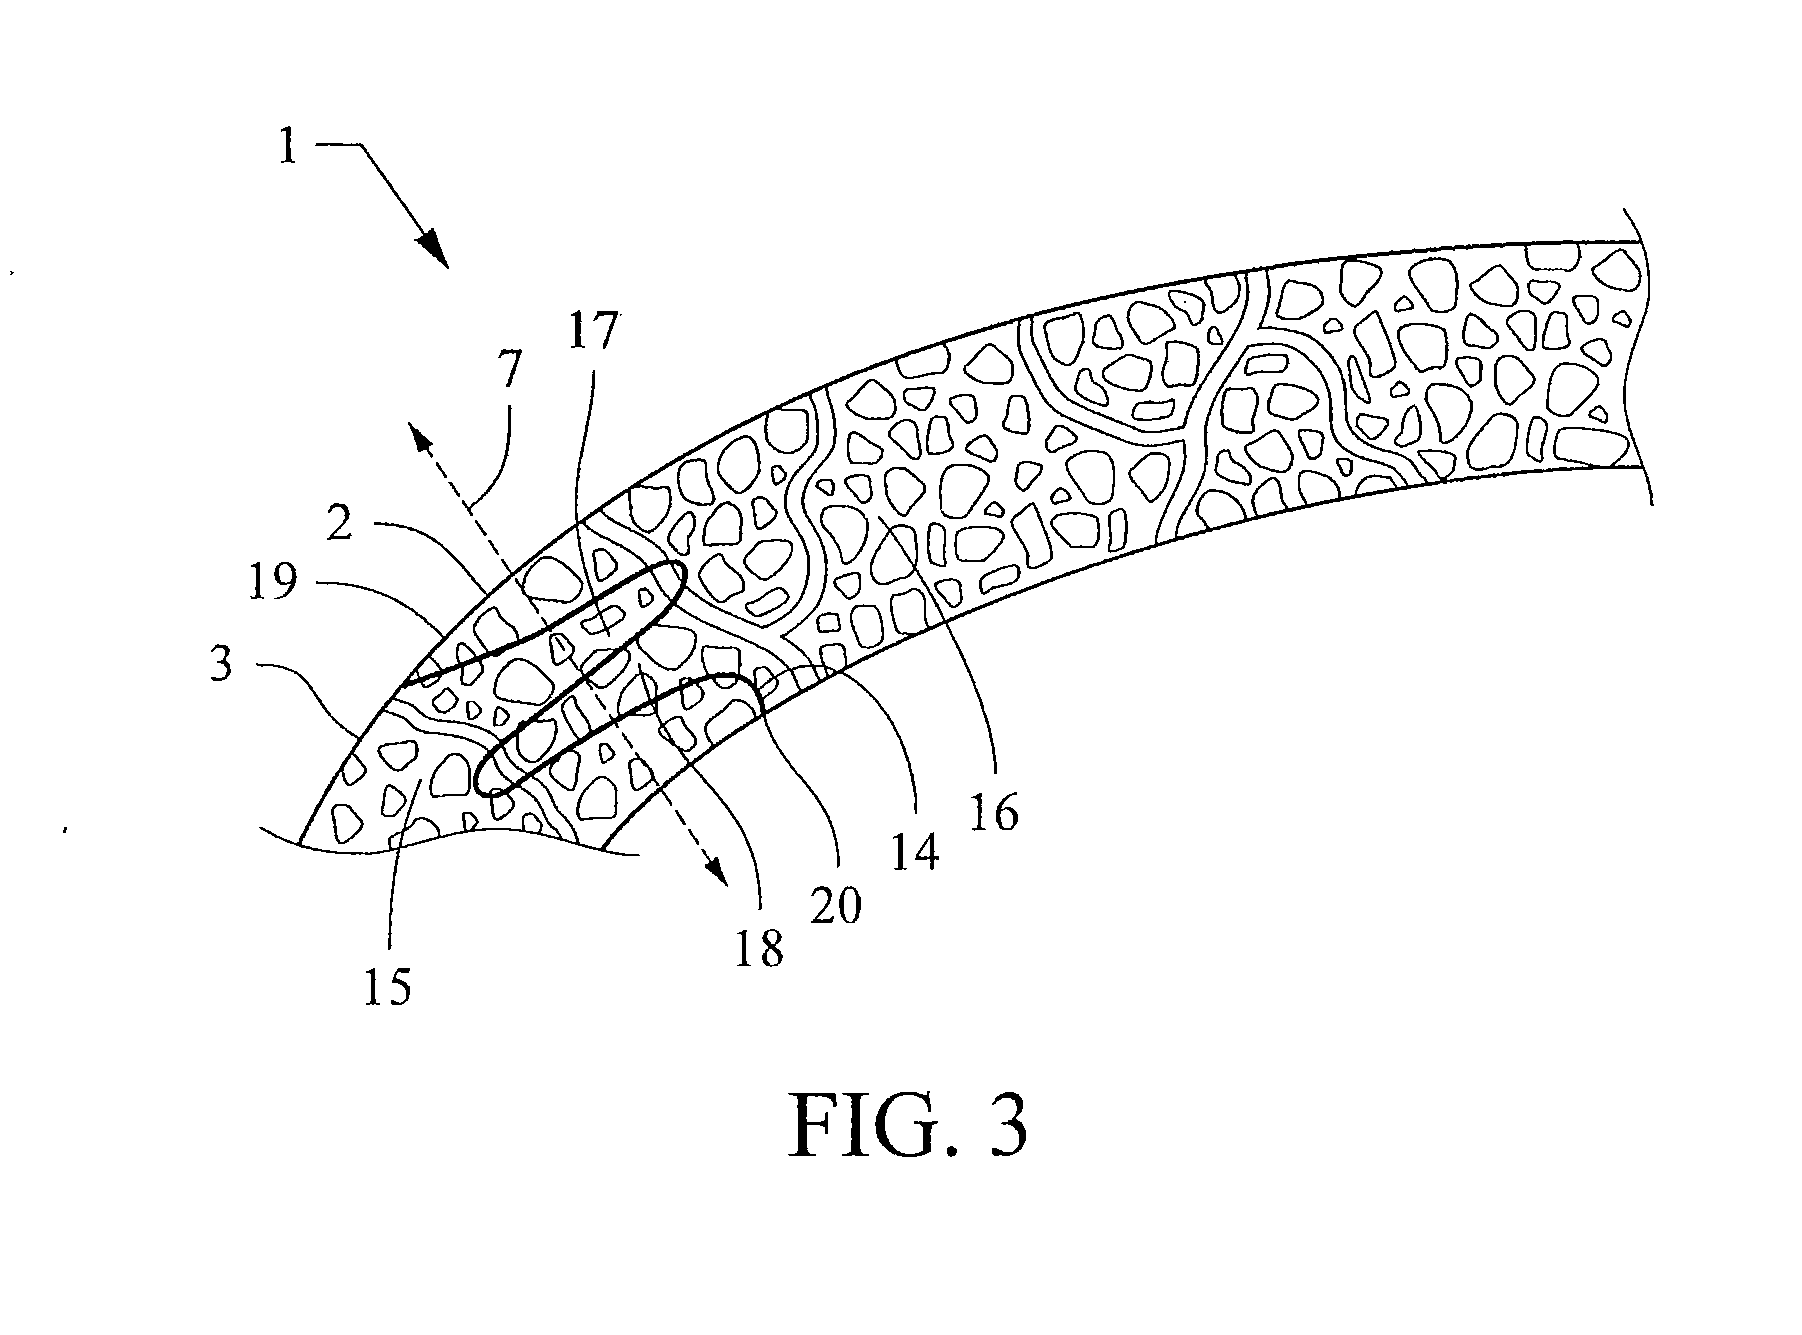 Laser system and method for performing and sealing corneal incisions in the eye